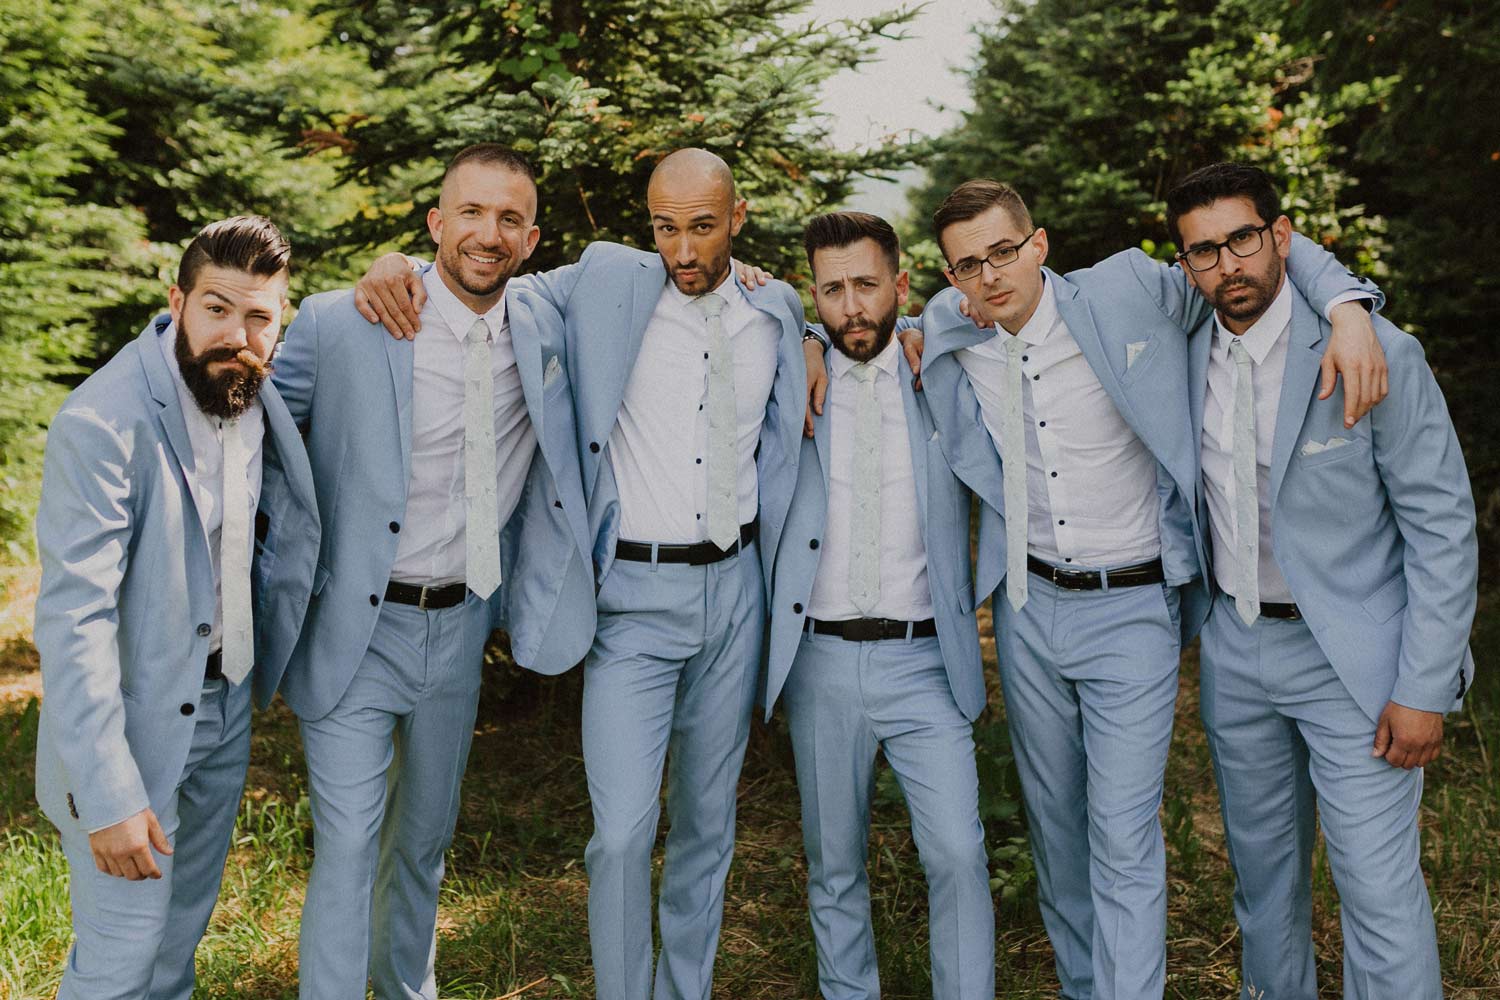 Palm tie worn by 6 groomsmen at a wedding wearing white shirts and light blue suits.